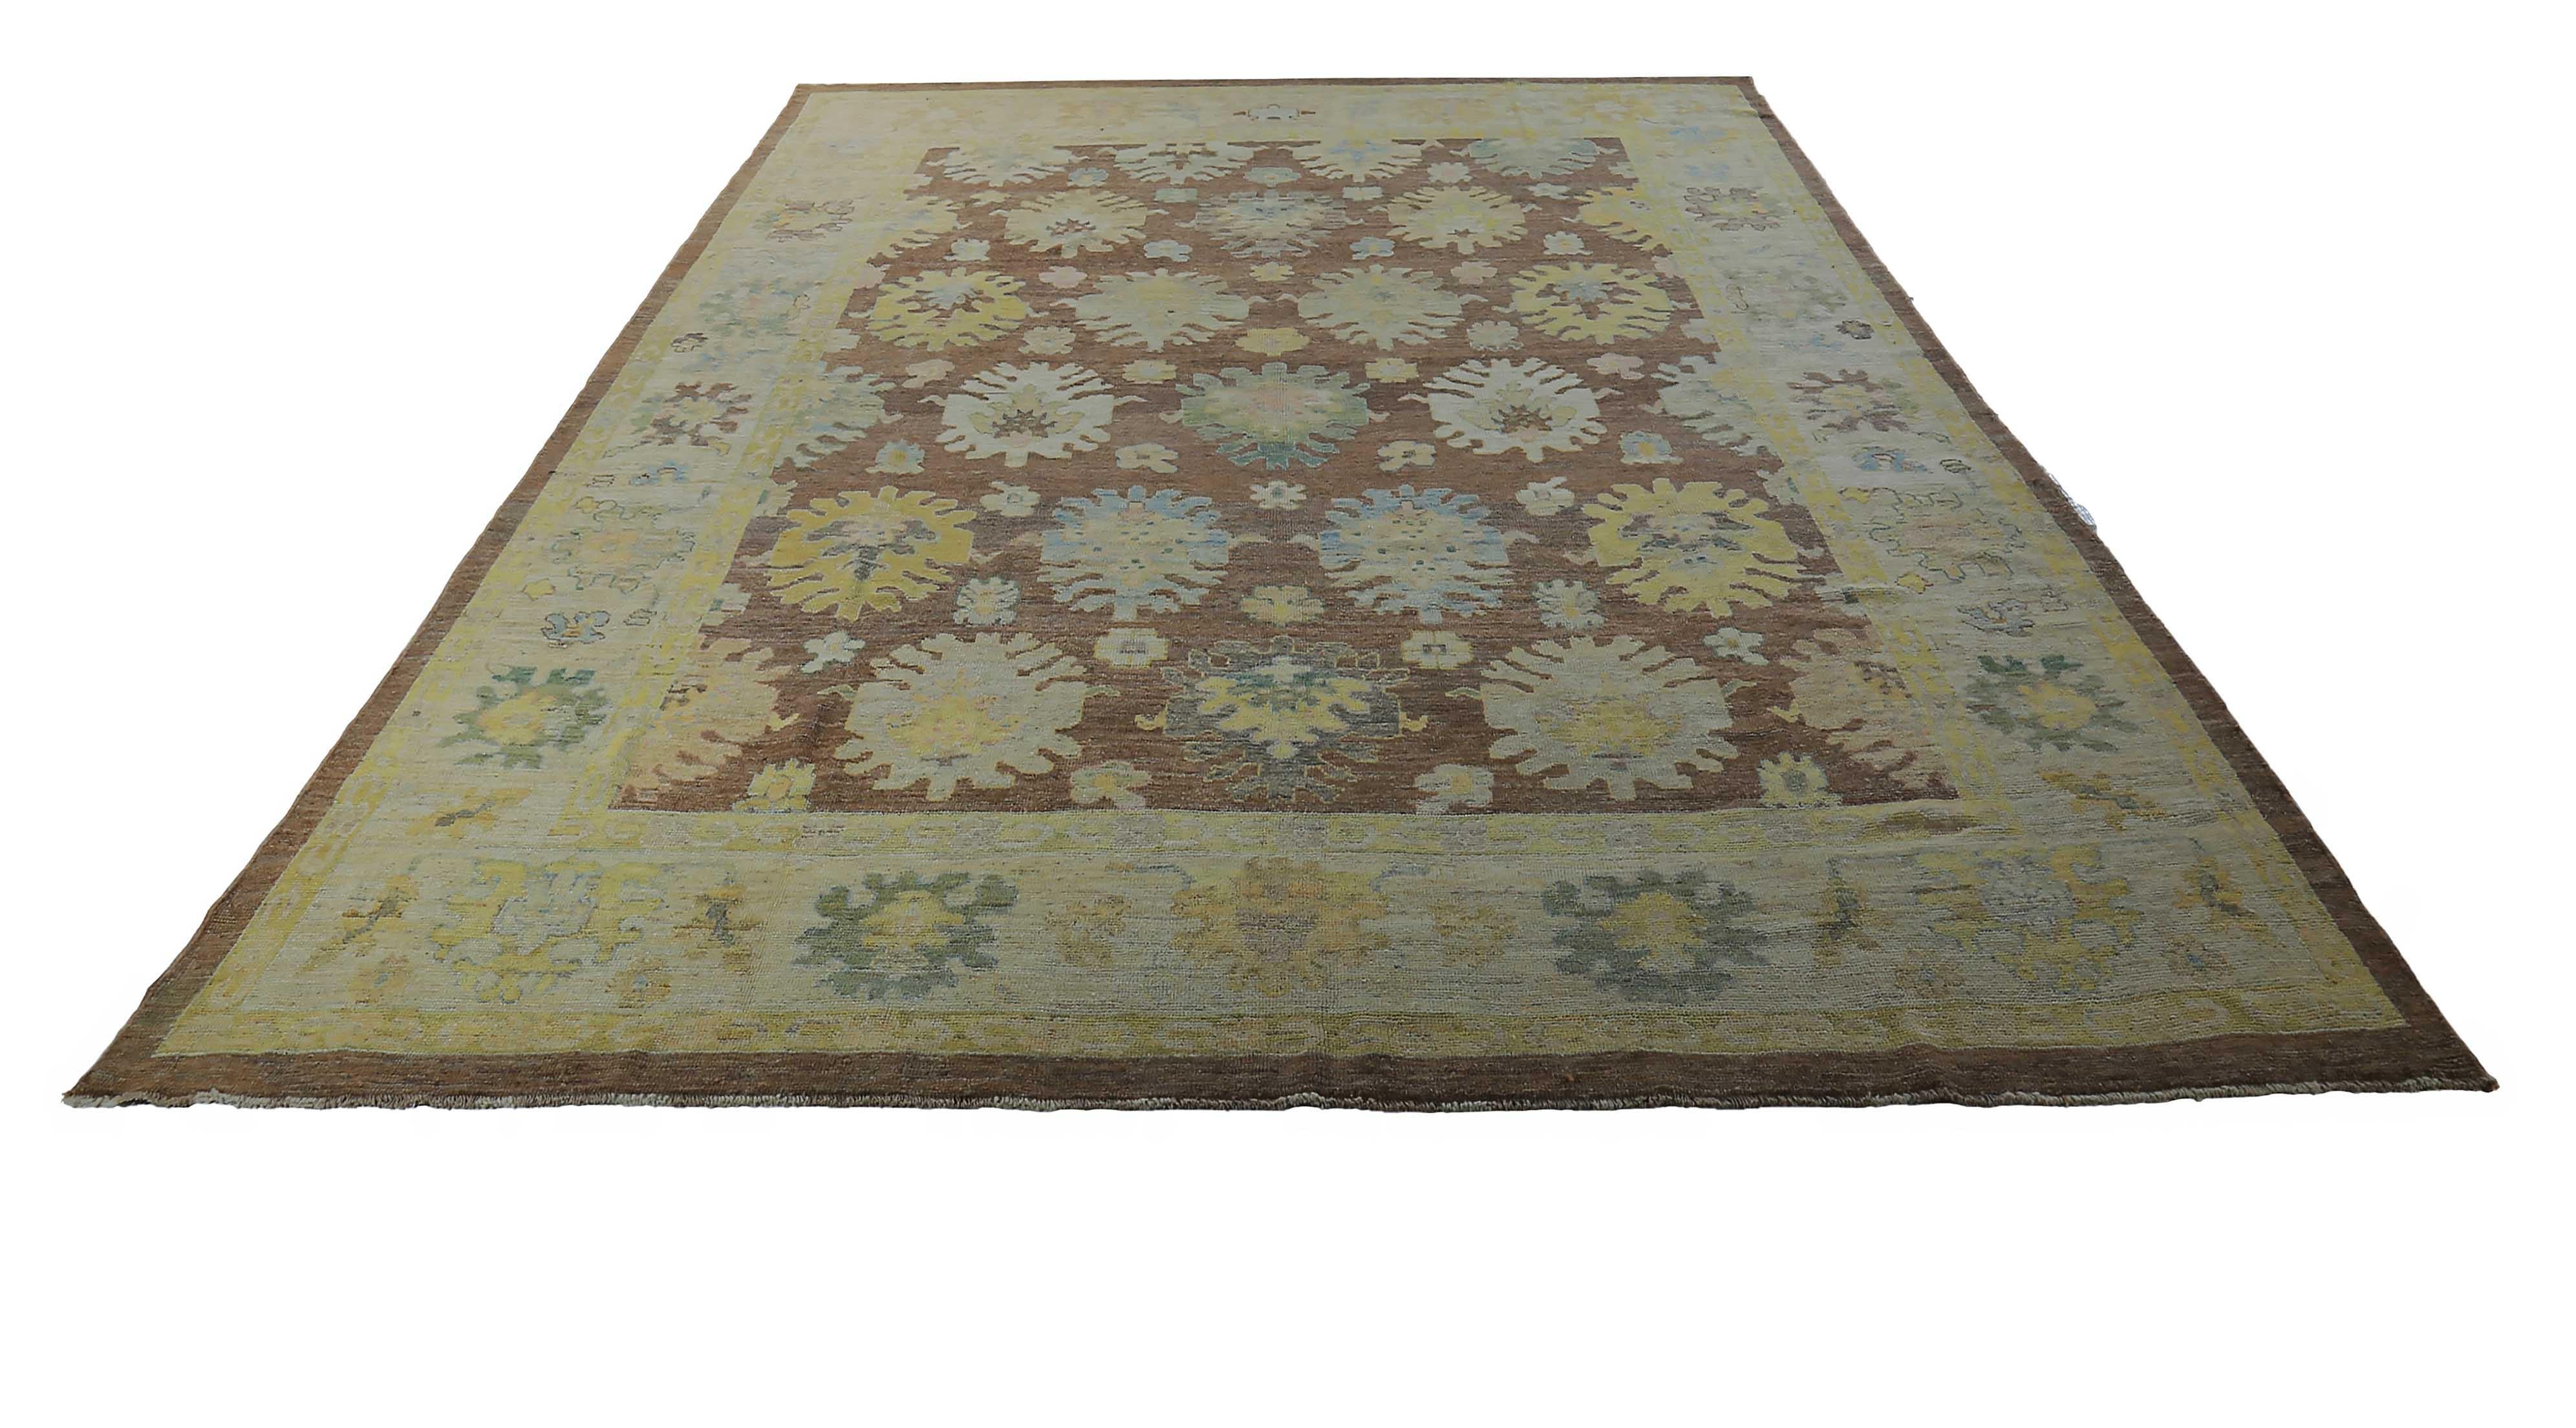 New Turkish rug made of handwoven sheep’s wool of the finest quality. It’s colored with organic vegetable dyes that are certified safe for humans and pets alike. It features blue and beige floral details on a brown field. Flower patterns are